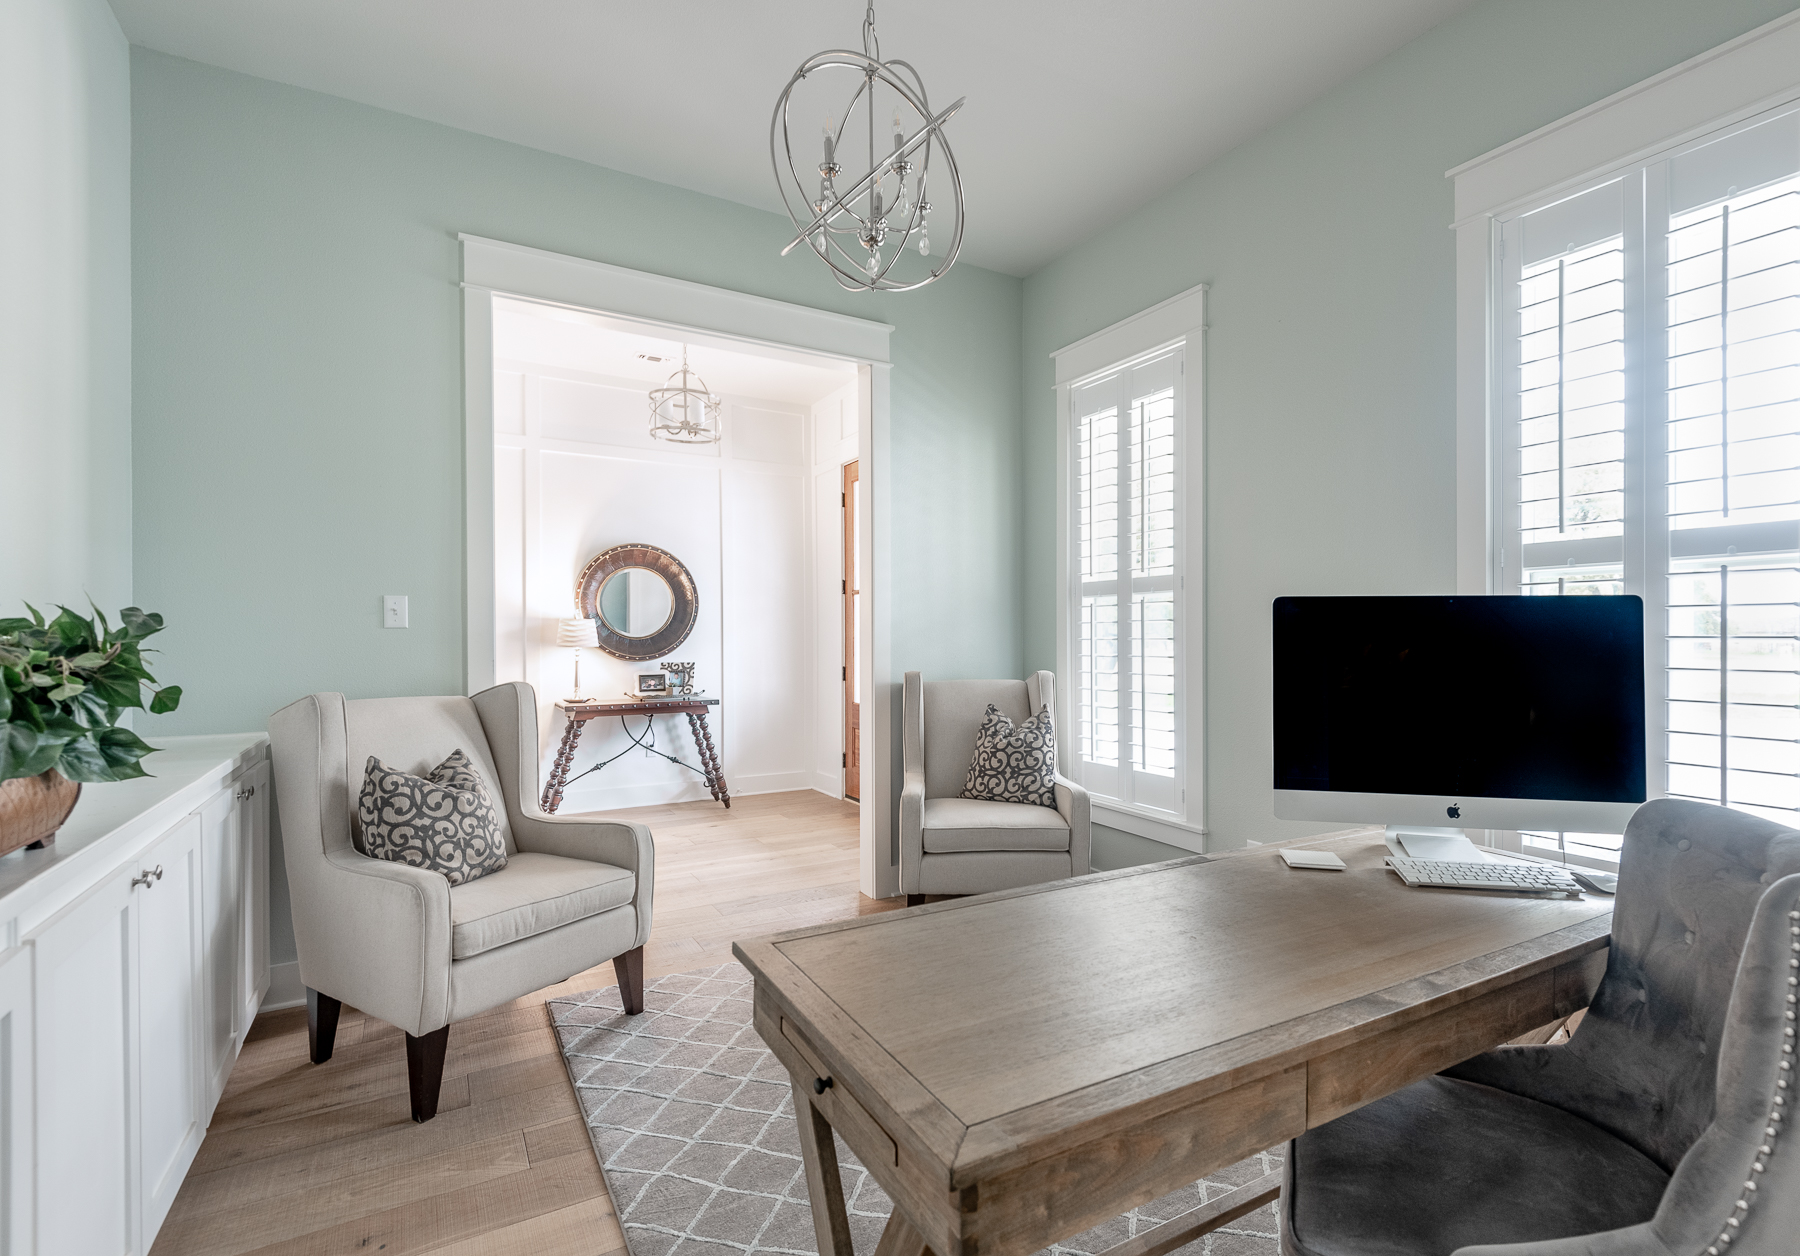 Home Office Refresh: One Room Challenge Week 1 ⋆ The Old Barn